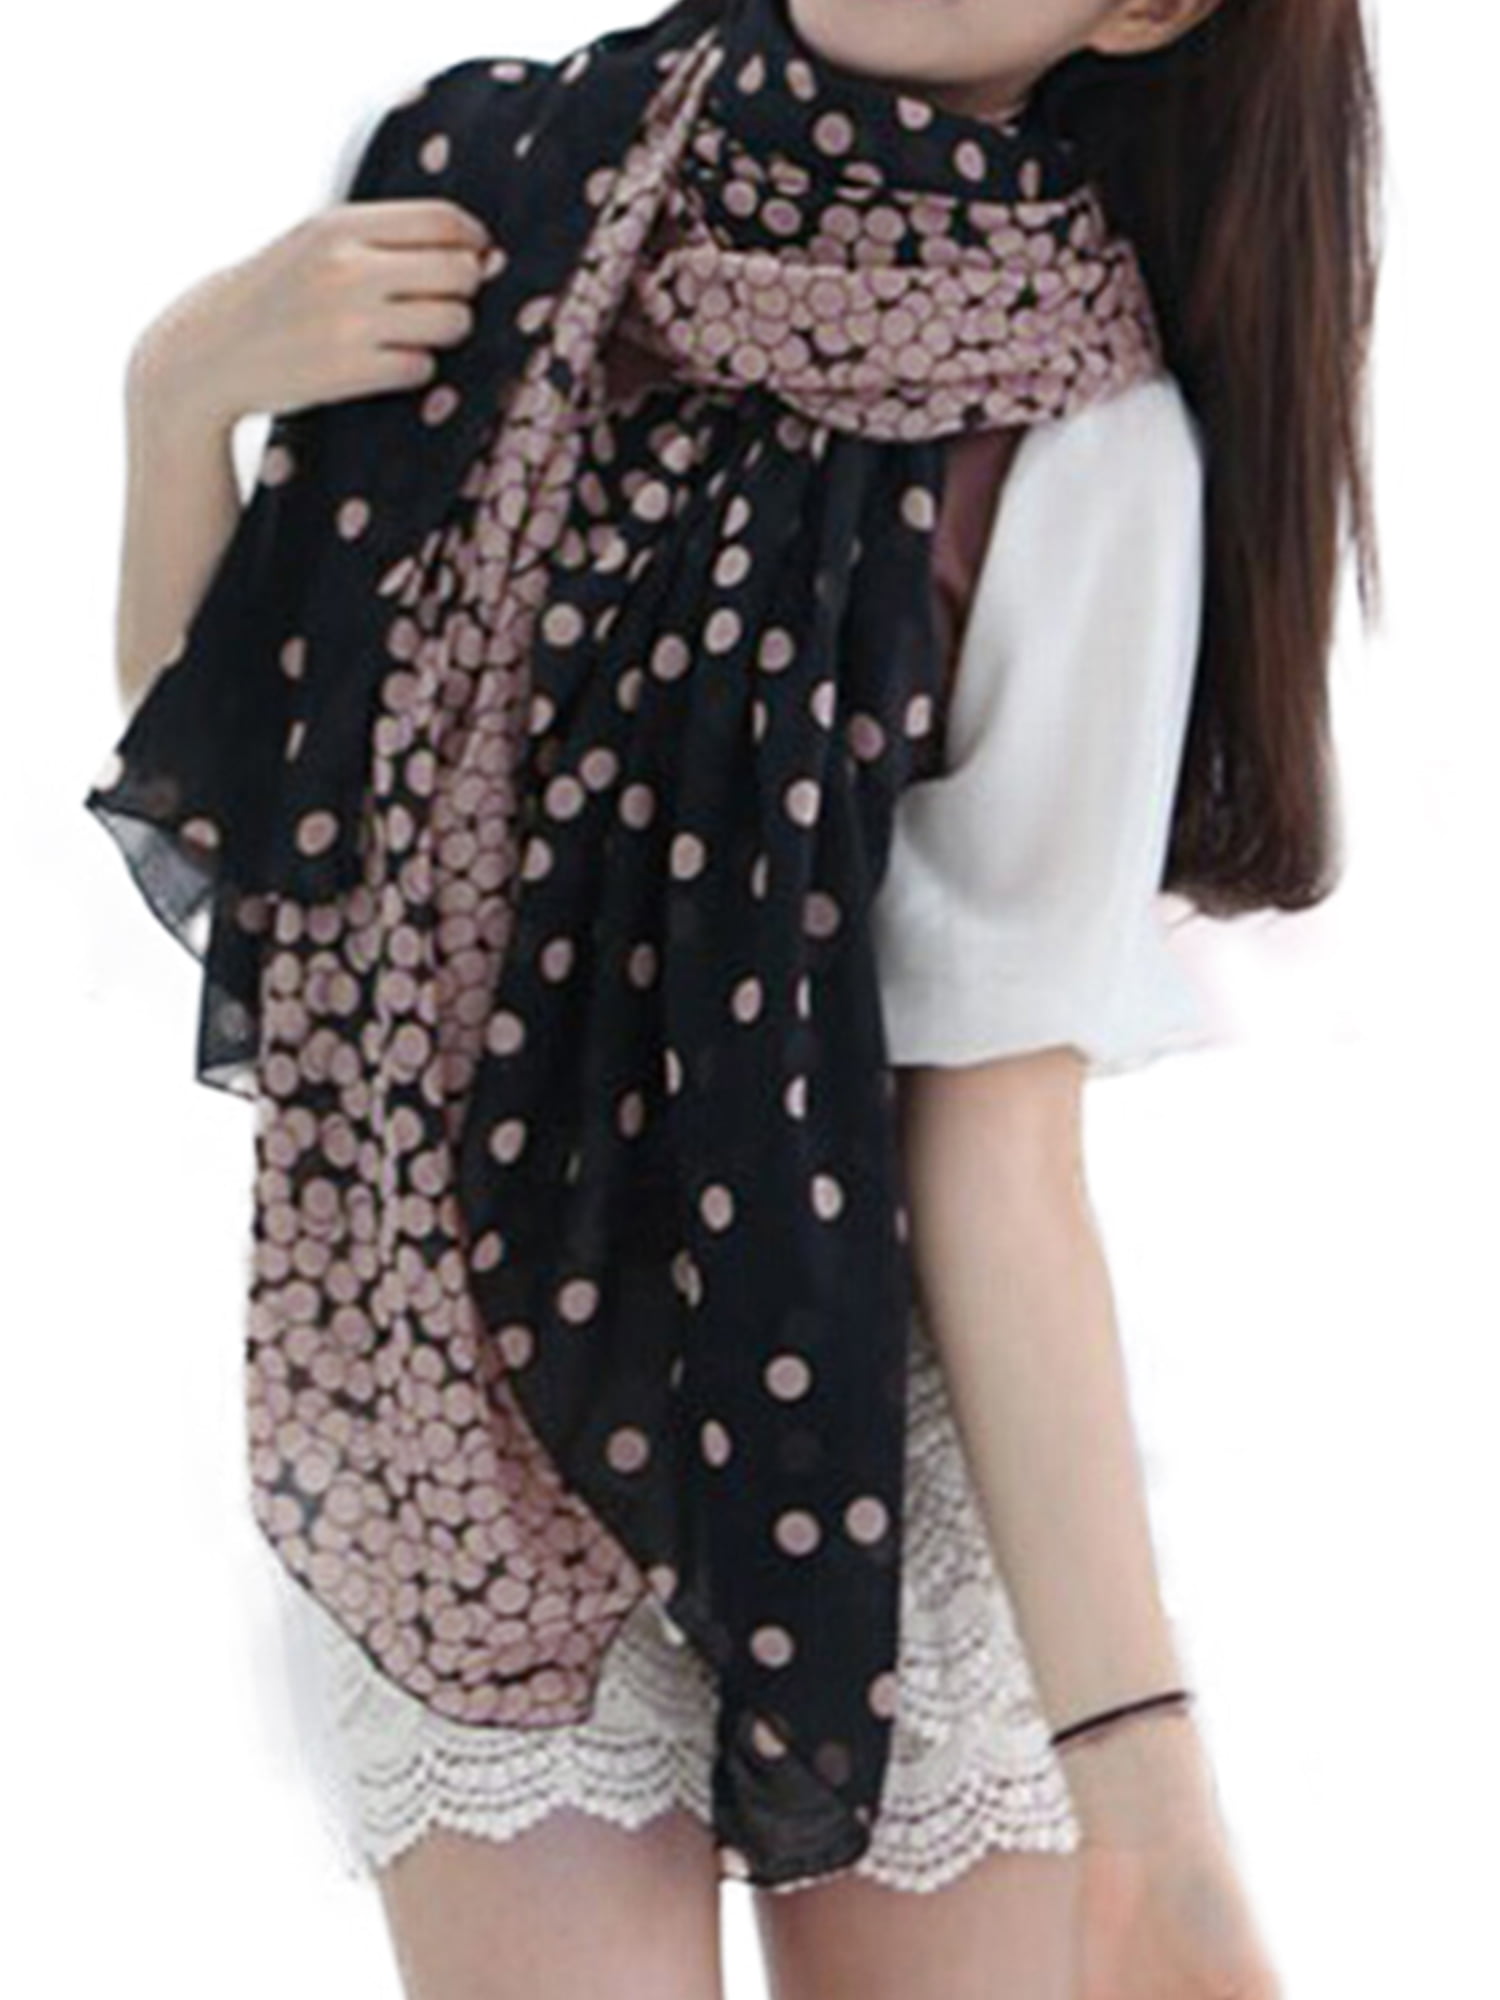 Fashion Scarfs for Women White Dots On Black Silk Scarves Long Lightweight Shawl Wrap for Face Cover Neck Warmer 